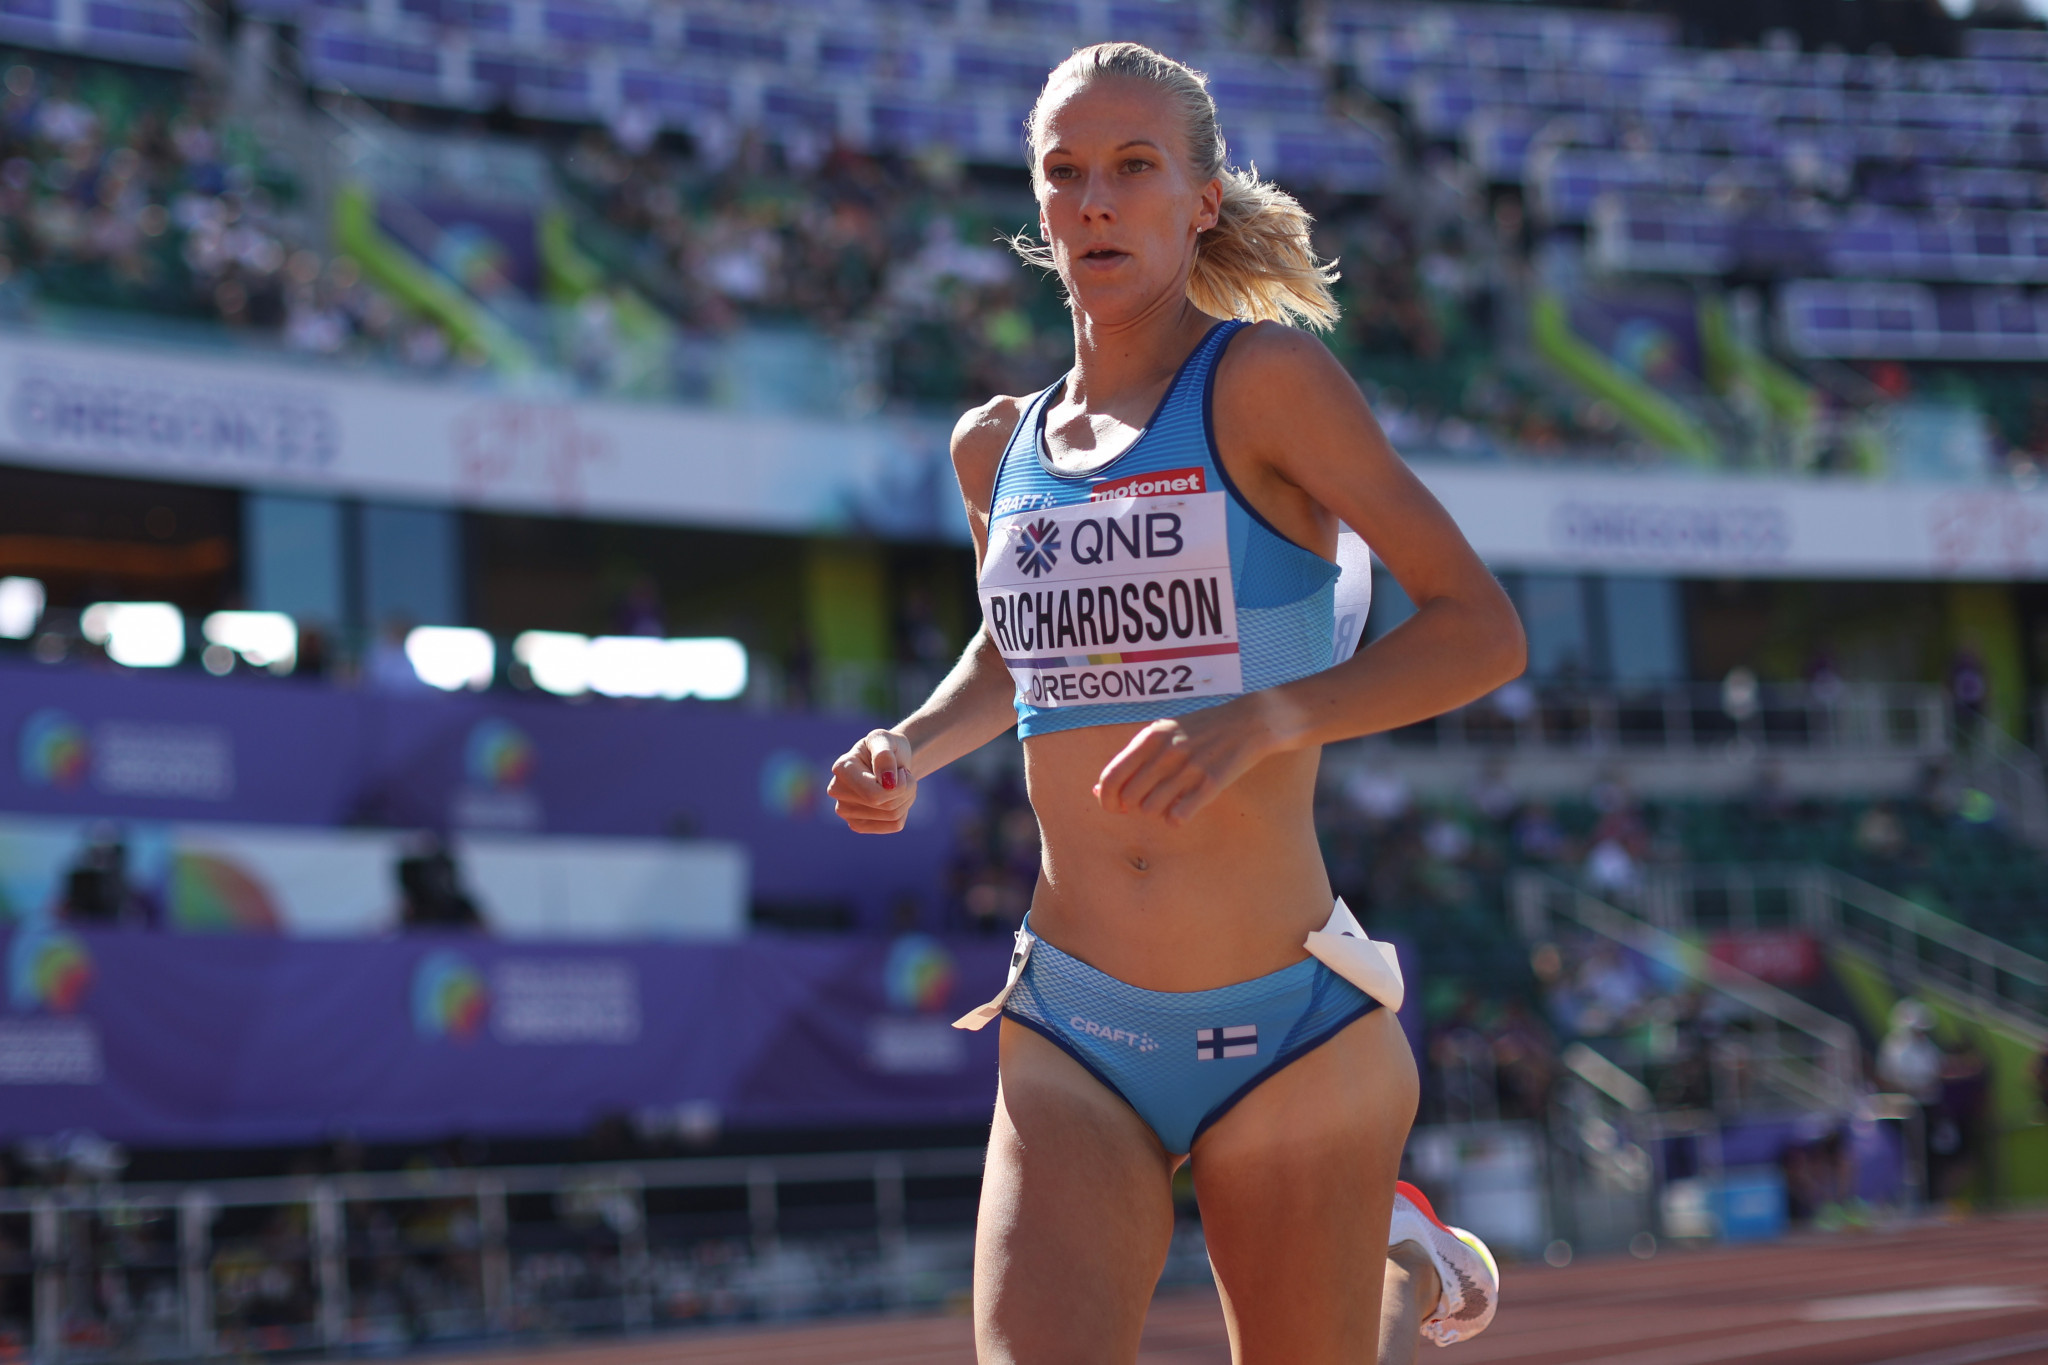 Camilla Richardsson is one of the athletes who contracted COVID-19 ©Getty Images